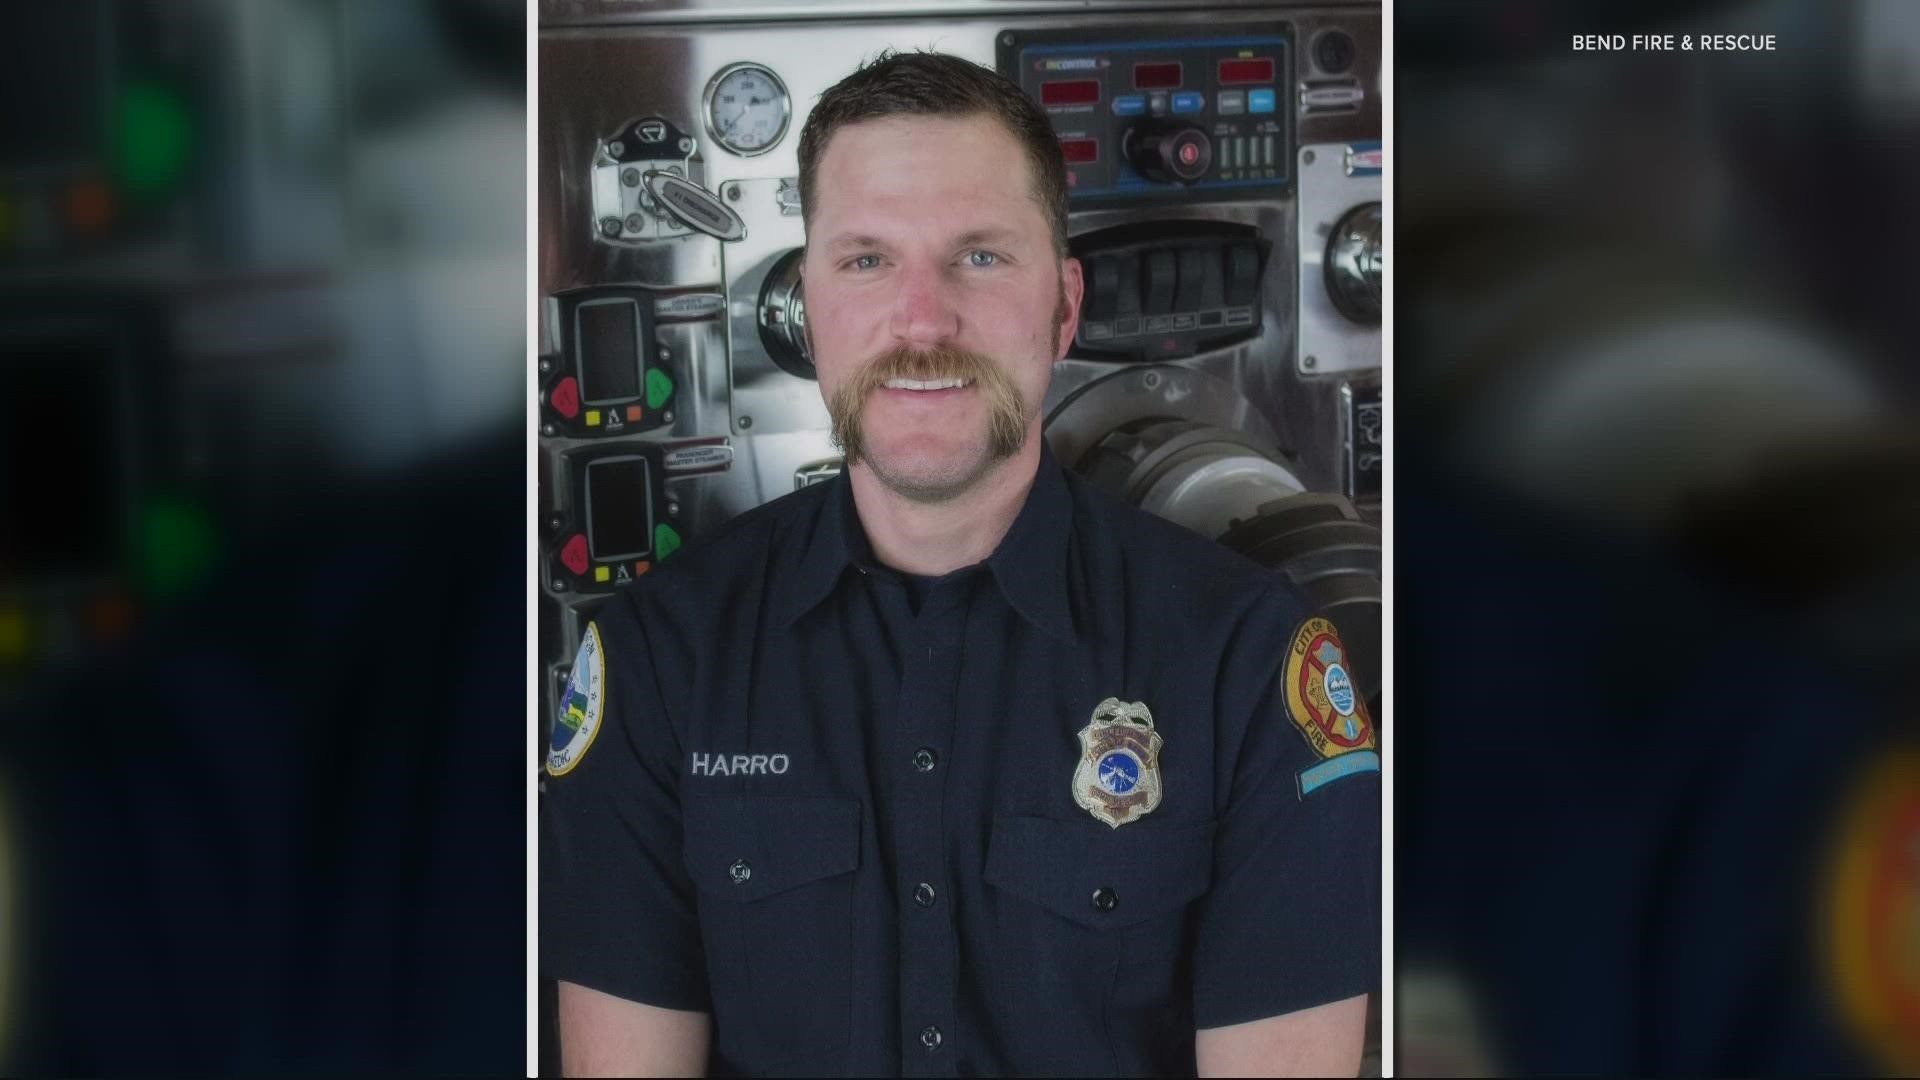 Daniel Harro, who worked in Bend and Scappoose, was off duty when the small plane he was flying went down in Idaho, killing him and his twin brother.